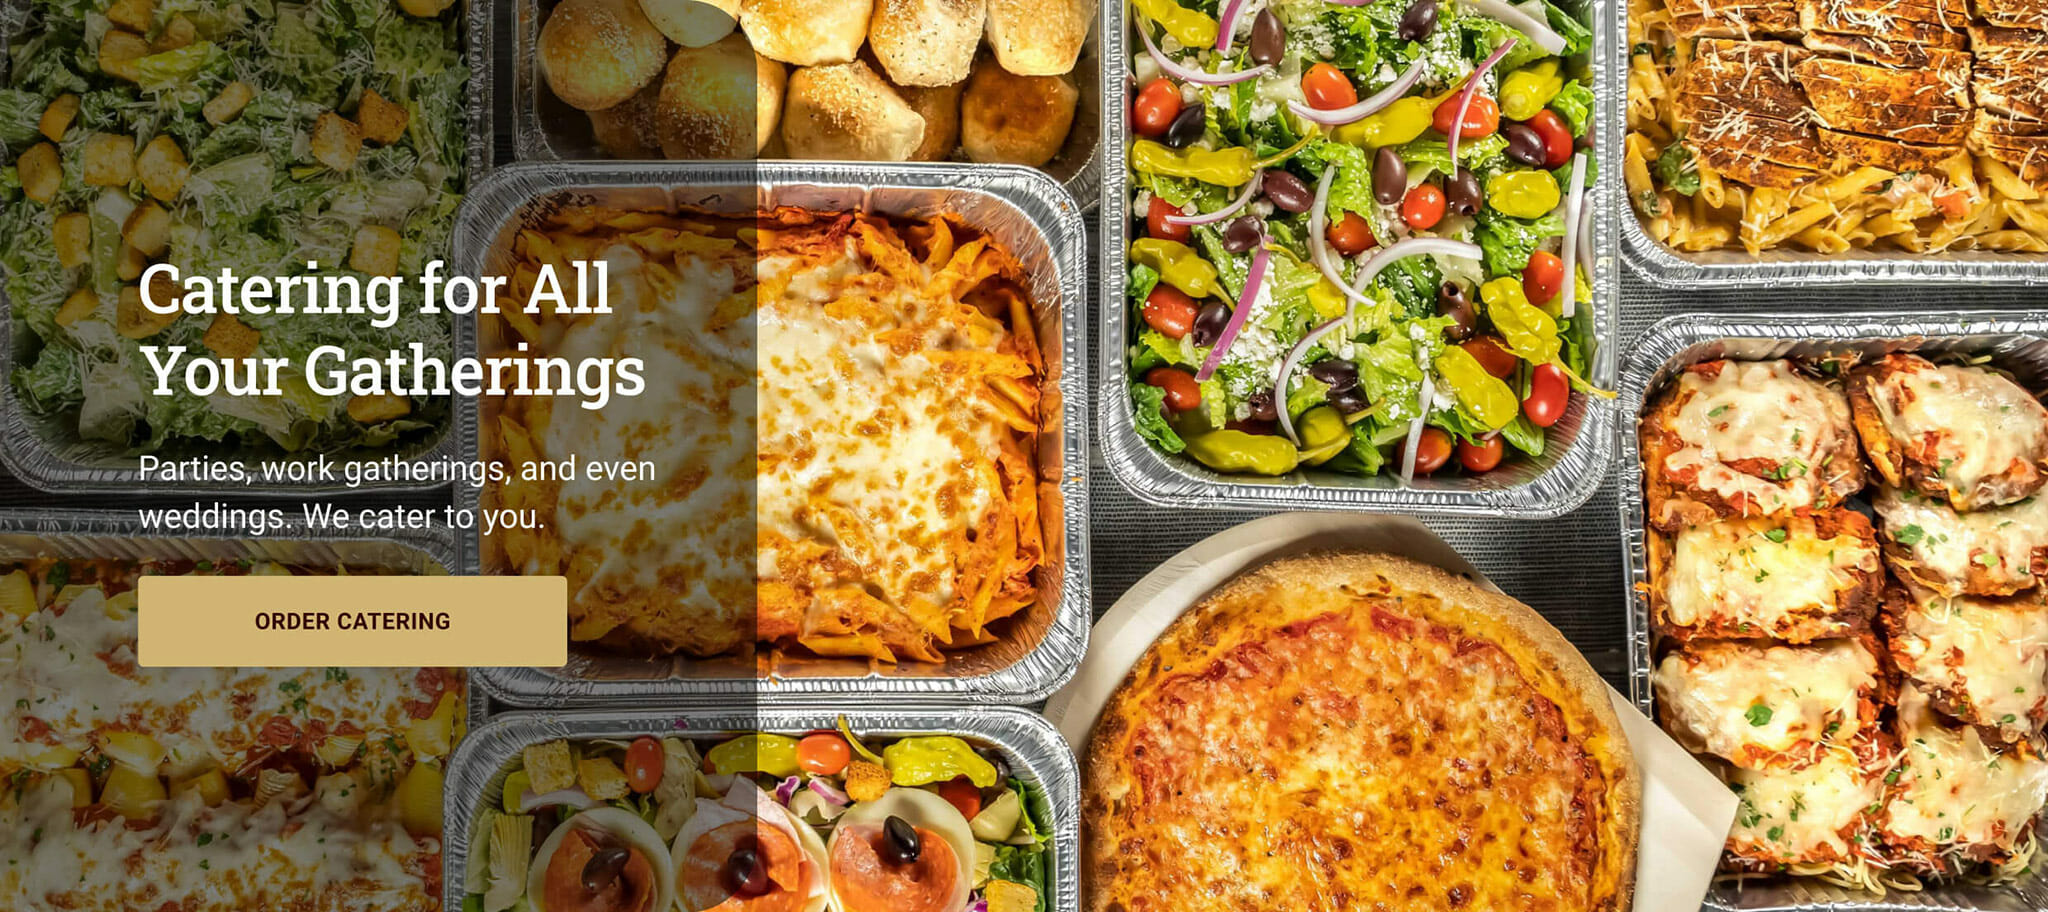 A group of multiple food items showing pasta, salad, pizza, and chicken parmesan in silver catering trays sitting on a table